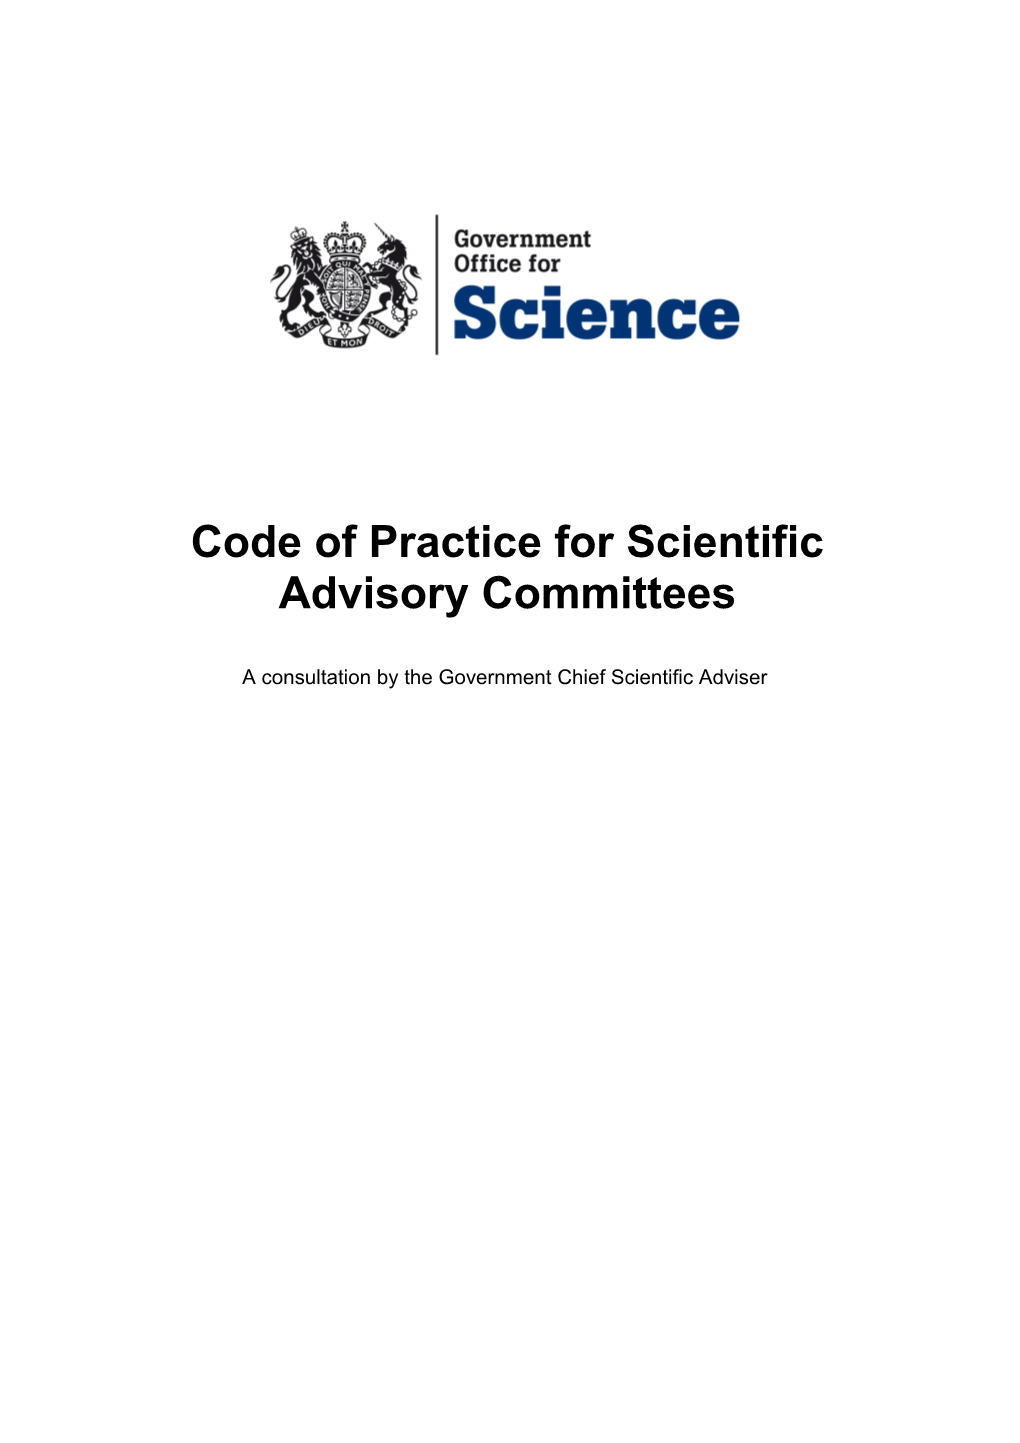 Code of Practice for Scientific Advisory Committees - 2010 Consultation Document